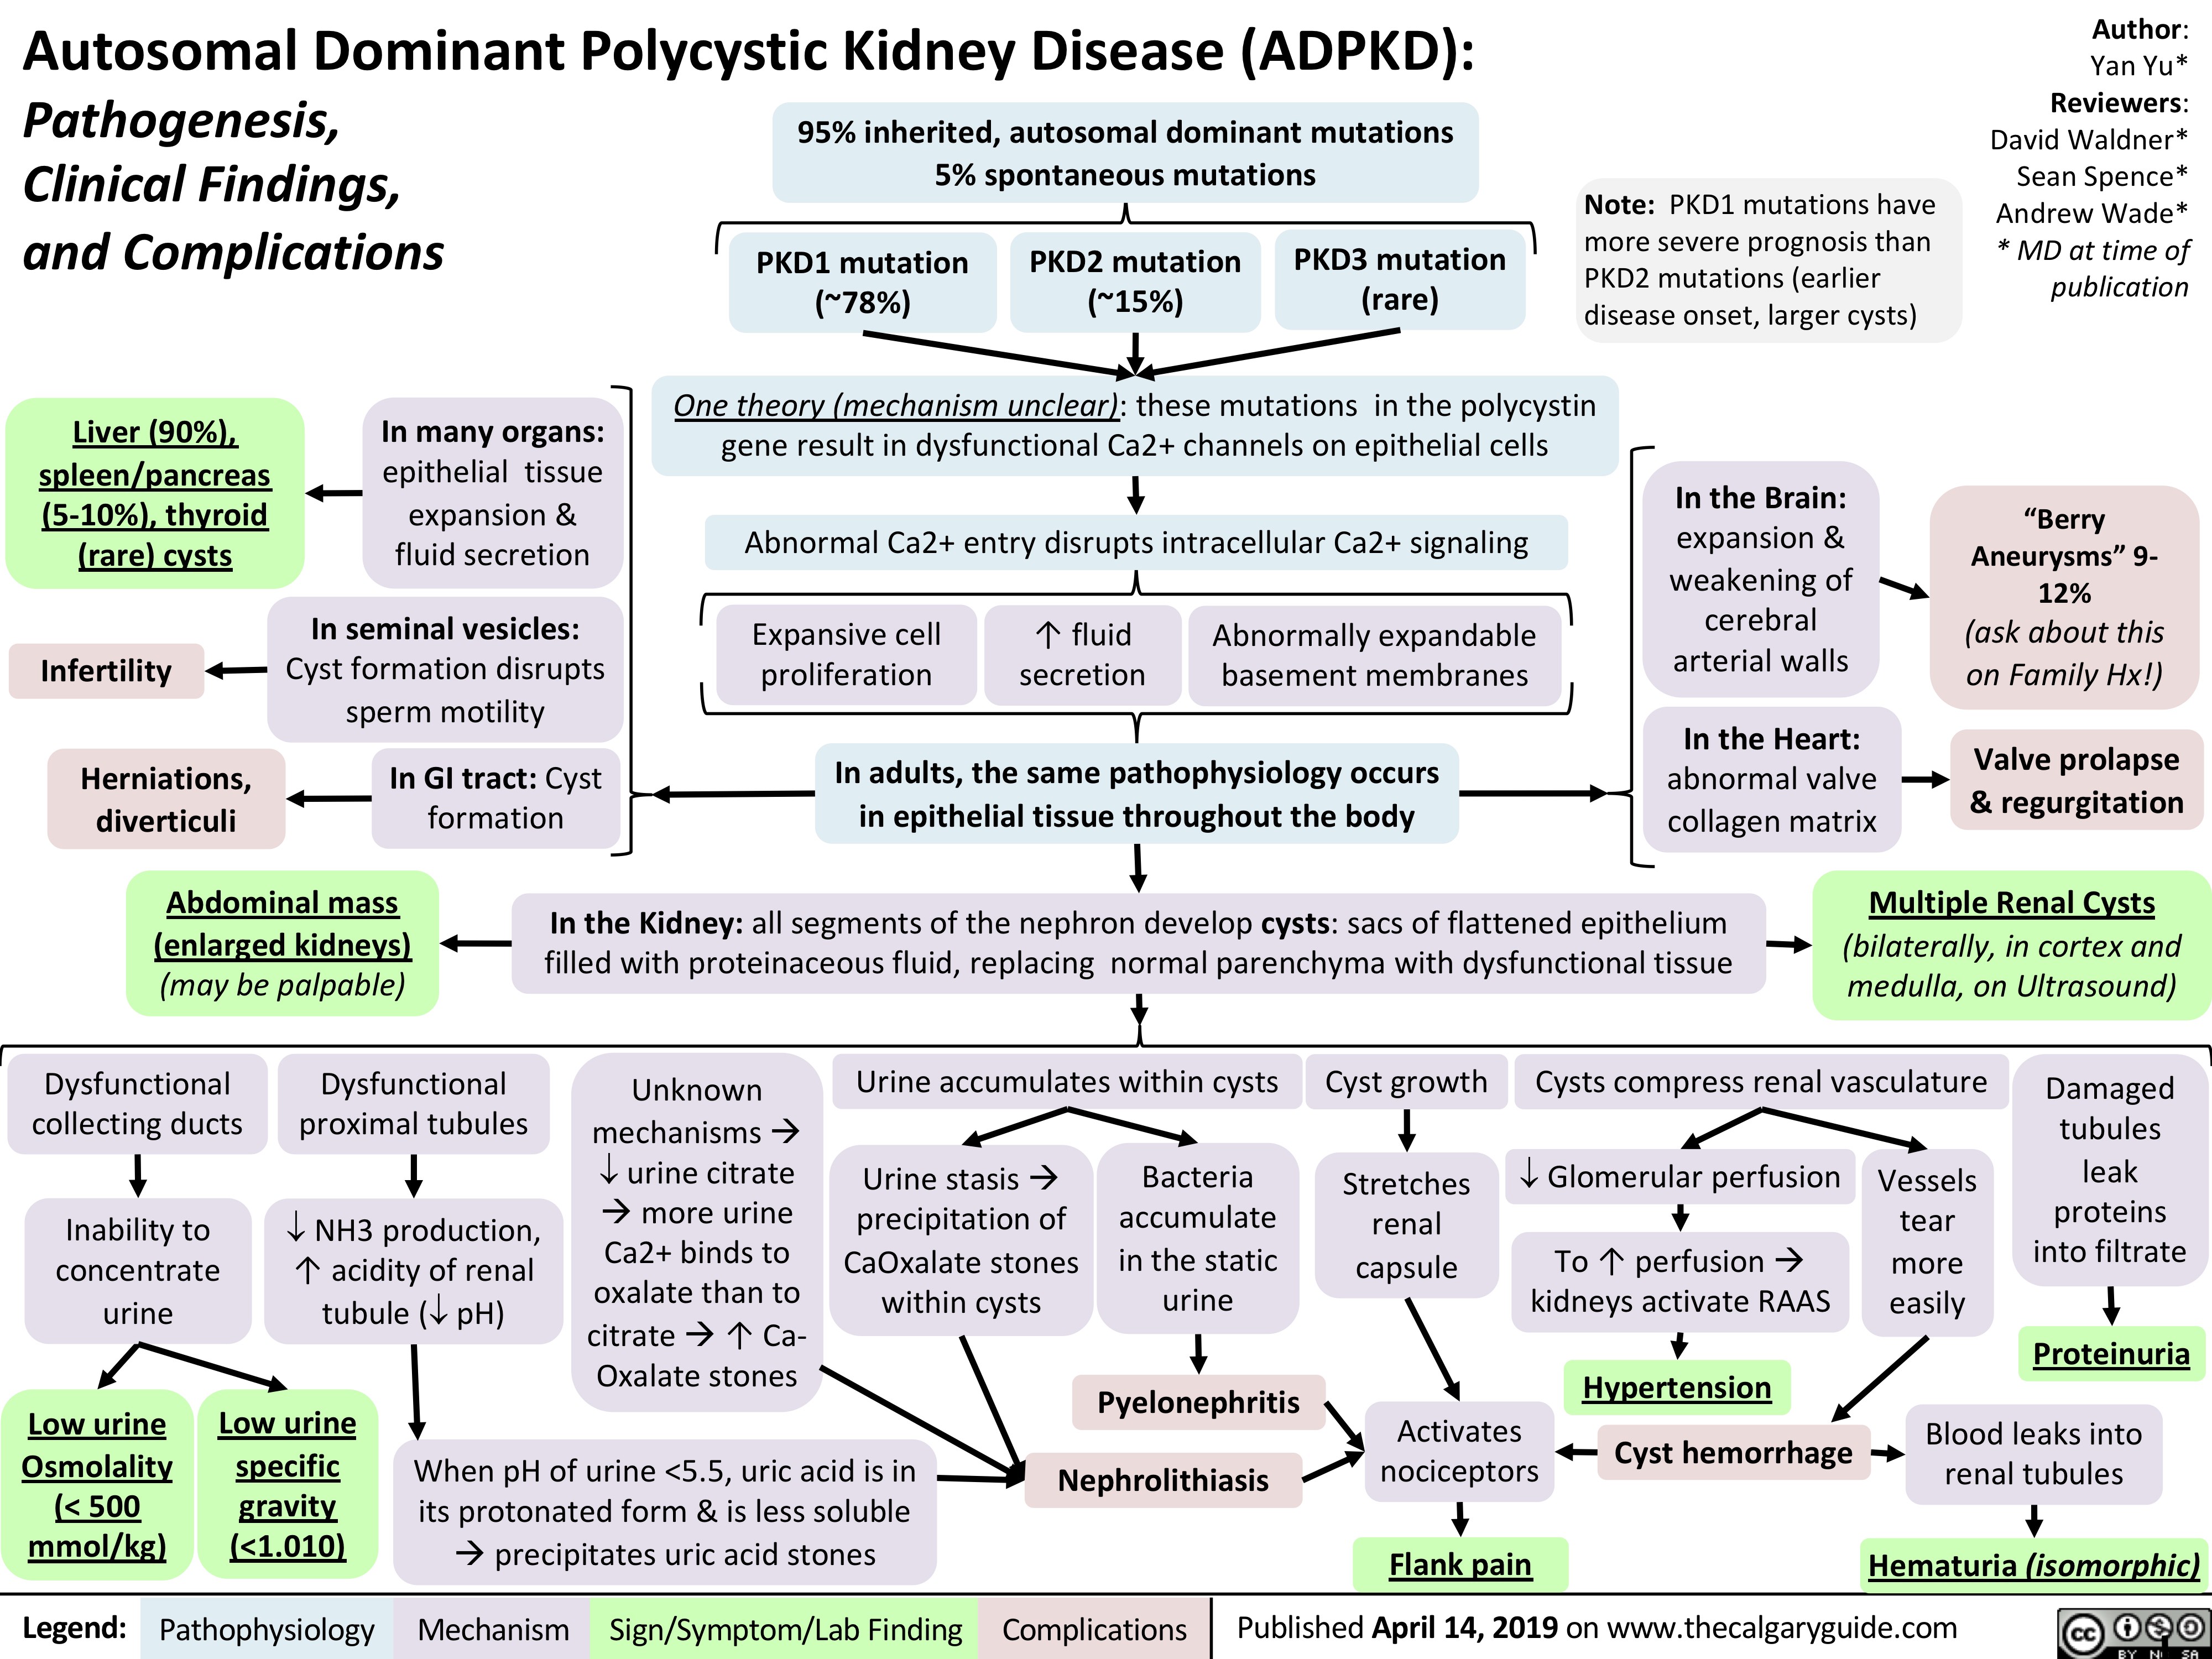 Autosomal Dominant Polycystic Kidney Disease (ADPKD):
Pathogenesis,
Clinical Findings,
and Complications
Author:
Yan Yu*
Reviewers:
David Waldner*
Sean Spence*
Andrew Wade*
* MD at time of
publication
Legend: Published April 14, 2019 on www.Pathophysiology Mechanism Sign/Symptom/Lab Finding Complications thecalgaryguide.com
One theory (mechanism unclear): these mutations in the polycystin
gene result in dysfunctional Ca2+ channels on epithelial cells
PKD1 mutation
(~78%)
Abnormal Ca2+ entry disrupts intracellular Ca2+ signaling
In the Kidney: all segments of the nephron develop cysts: sacs of flattened epithelium
filled with proteinaceous fluid, replacing normal parenchyma with dysfunctional tissue
PKD2 mutation
(~15%)
Expansive cell
proliferation
Low urine
Osmolality
(< 500
mmol/kg)
Abnormally expandable
basement membranes
PKD3 mutation
(rare)
↑ fluid
secretion
95% inherited, autosomal dominant mutations
5% spontaneous mutations
In adults, the same pathophysiology occurs
in epithelial tissue throughout the body
When pH of urine <5.5, uric acid is in
its protonated form & is less soluble
àprecipitates uric acid stones
Nephrolithiasis
Urine accumulates within cysts Cyst growth
Pyelonephritis
Damaged
tubules
leak
proteins
into filtrate
Proteinuria
Flank pain
Inability to
concentrate
urine
Low urine
specific
gravity
(<1.010)
¯ NH3 production,
↑ acidity of renal
tubule (¯ pH)
Activates
nociceptors Cyst hemorrhage
Urine stasis à
precipitation of
CaOxalate stones
within cysts
Multiple Renal Cysts
(bilaterally, in cortex and
medulla, on Ultrasound)
In the Brain:
expansion &
weakening of
cerebral
arterial walls
“Berry
Aneurysms” 9-
12%
(ask about this
on Family Hx!)
In many organs:
epithelial tissue
expansion &
fluid secretion
In the Heart:
abnormal valve
collagen matrix
Valve prolapse
& regurgitation
Liver (90%),
spleen/pancreas
(5-10%), thyroid
(rare) cysts
In seminal vesicles:
Cyst formation disrupts
sperm motility
Infertility
In GI tract: Cyst
formation
Herniations,
diverticuli
Dysfunctional
collecting ducts
Abdominal mass
(enlarged kidneys)
(may be palpable)
Blood leaks into
renal tubules
Hematuria (isomorphic)
Bacteria
accumulate
in the static
urine
Dysfunctional
proximal tubules
Unknown
mechanisms à
¯ urine citrate
àmore urine
Ca2+ binds to
oxalate than to
citrate à↑ Ca-
Oxalate stones
Note: PKD1 mutations have
more severe prognosis than
PKD2 mutations (earlier
disease onset, larger cysts)
Vessels
tear
more
easily
Stretches
renal
capsule
Cysts compress renal vasculature
¯ Glomerular perfusion
To ↑ perfusion à
kidneys activate RAAS
Hypertension